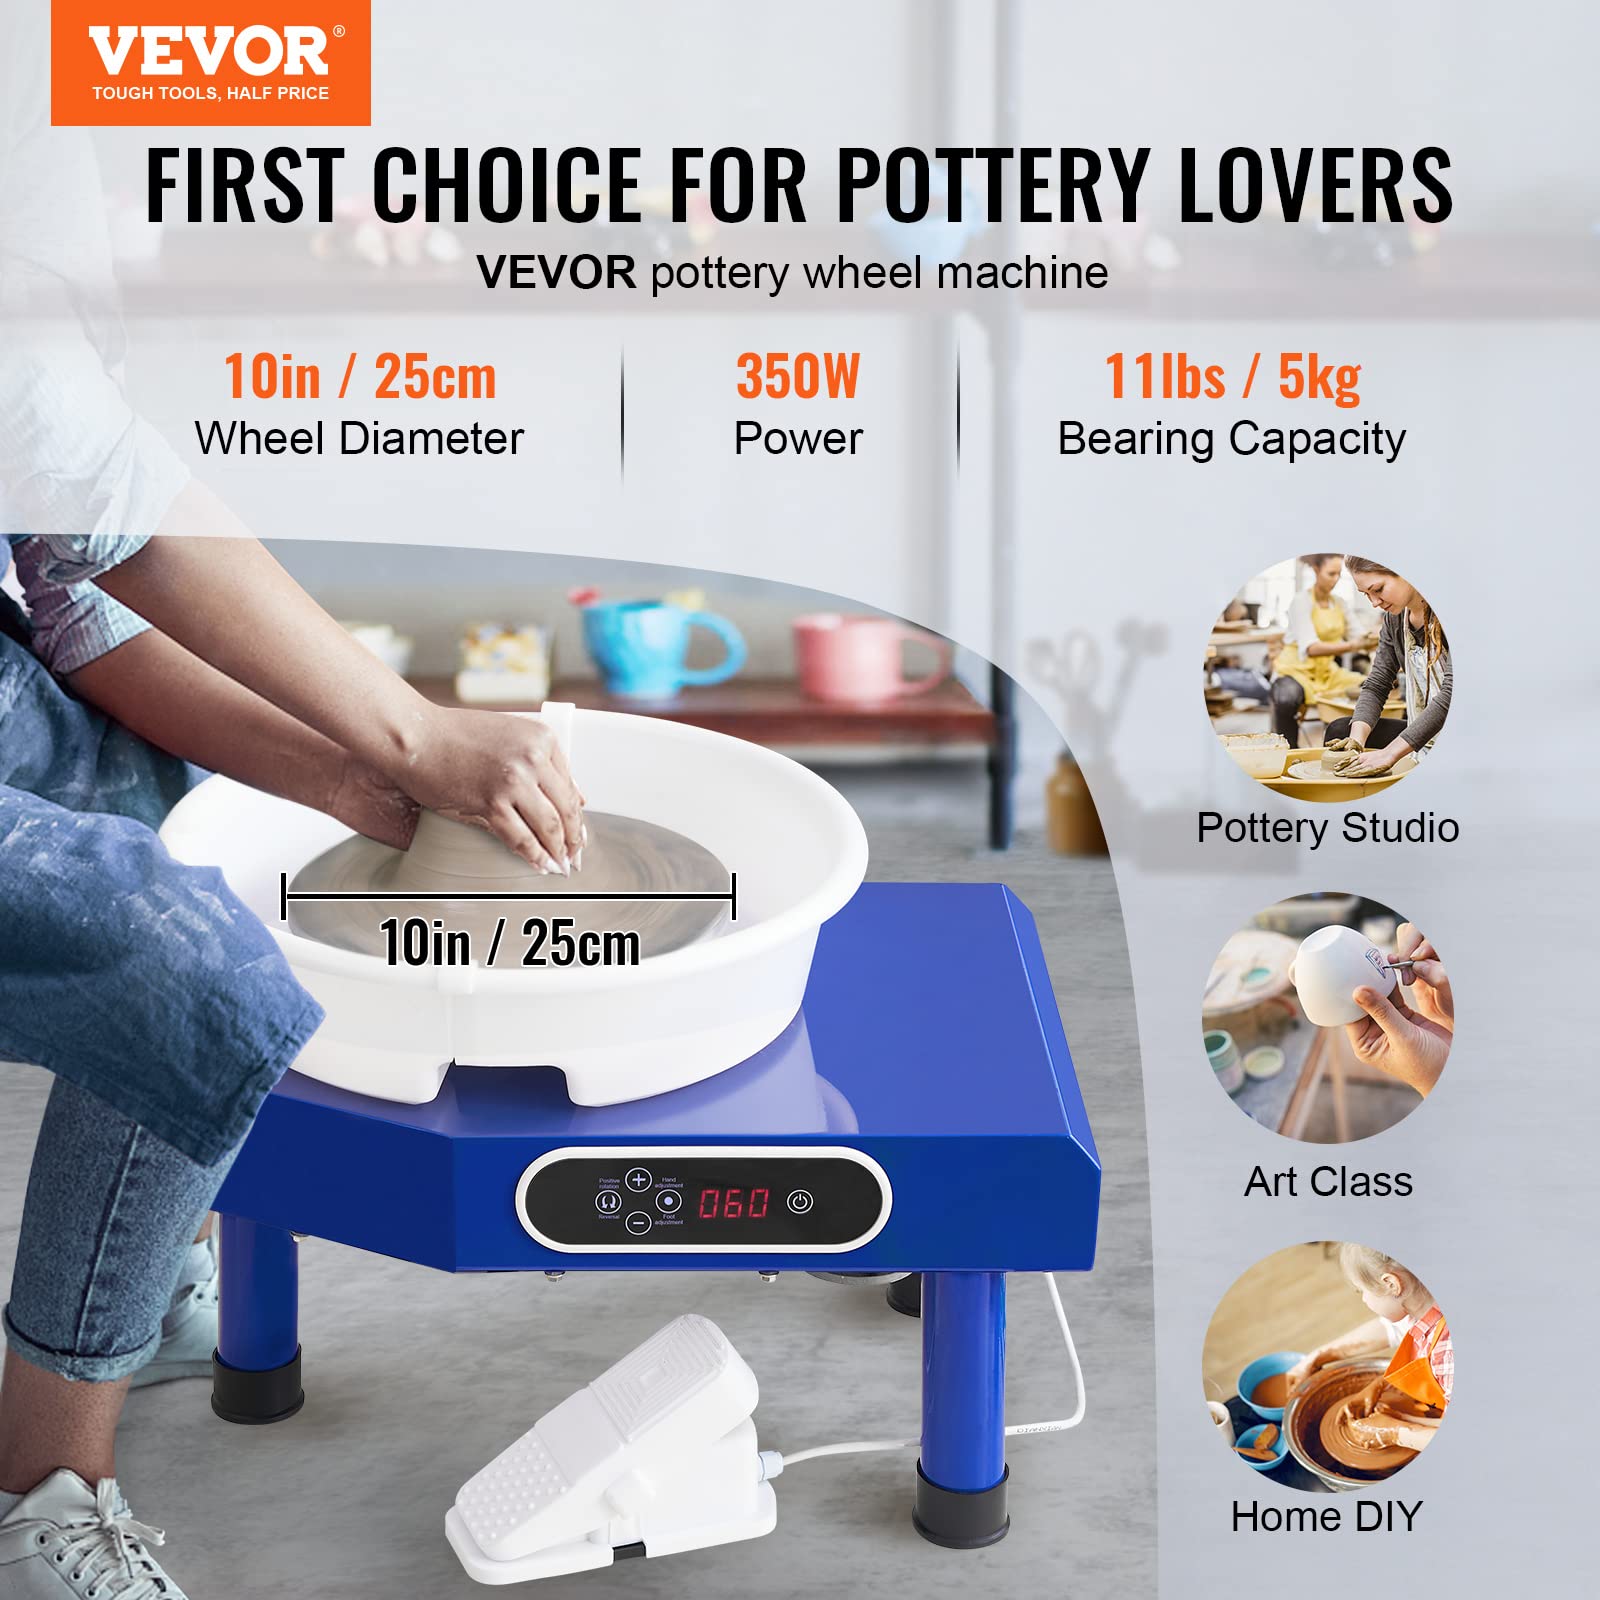 VEVOR Ceramic Wheel Forming Machine Foot Pedal ABS Detachable Basin, Sculpting Tool Apron Accessory Kit for Work Art Craft DIY, Blue